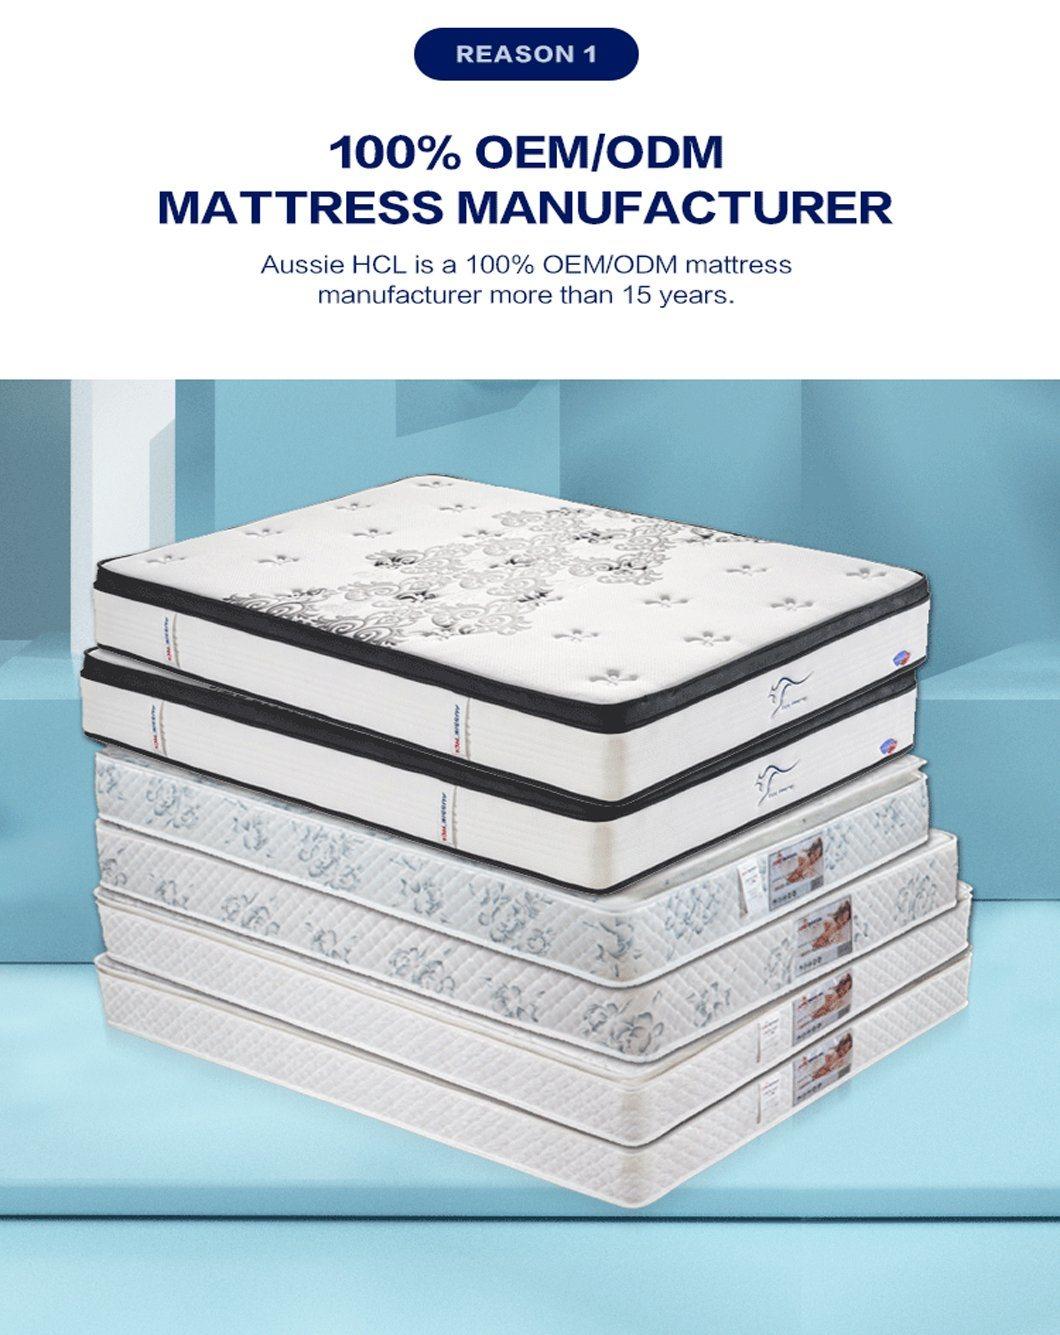 The Best Factory Aussie Pressure Relieve Cool Sleep Hybrid Mattresses with Memory Foam Individual Coil Mattress Roll in a Box Medium Firm